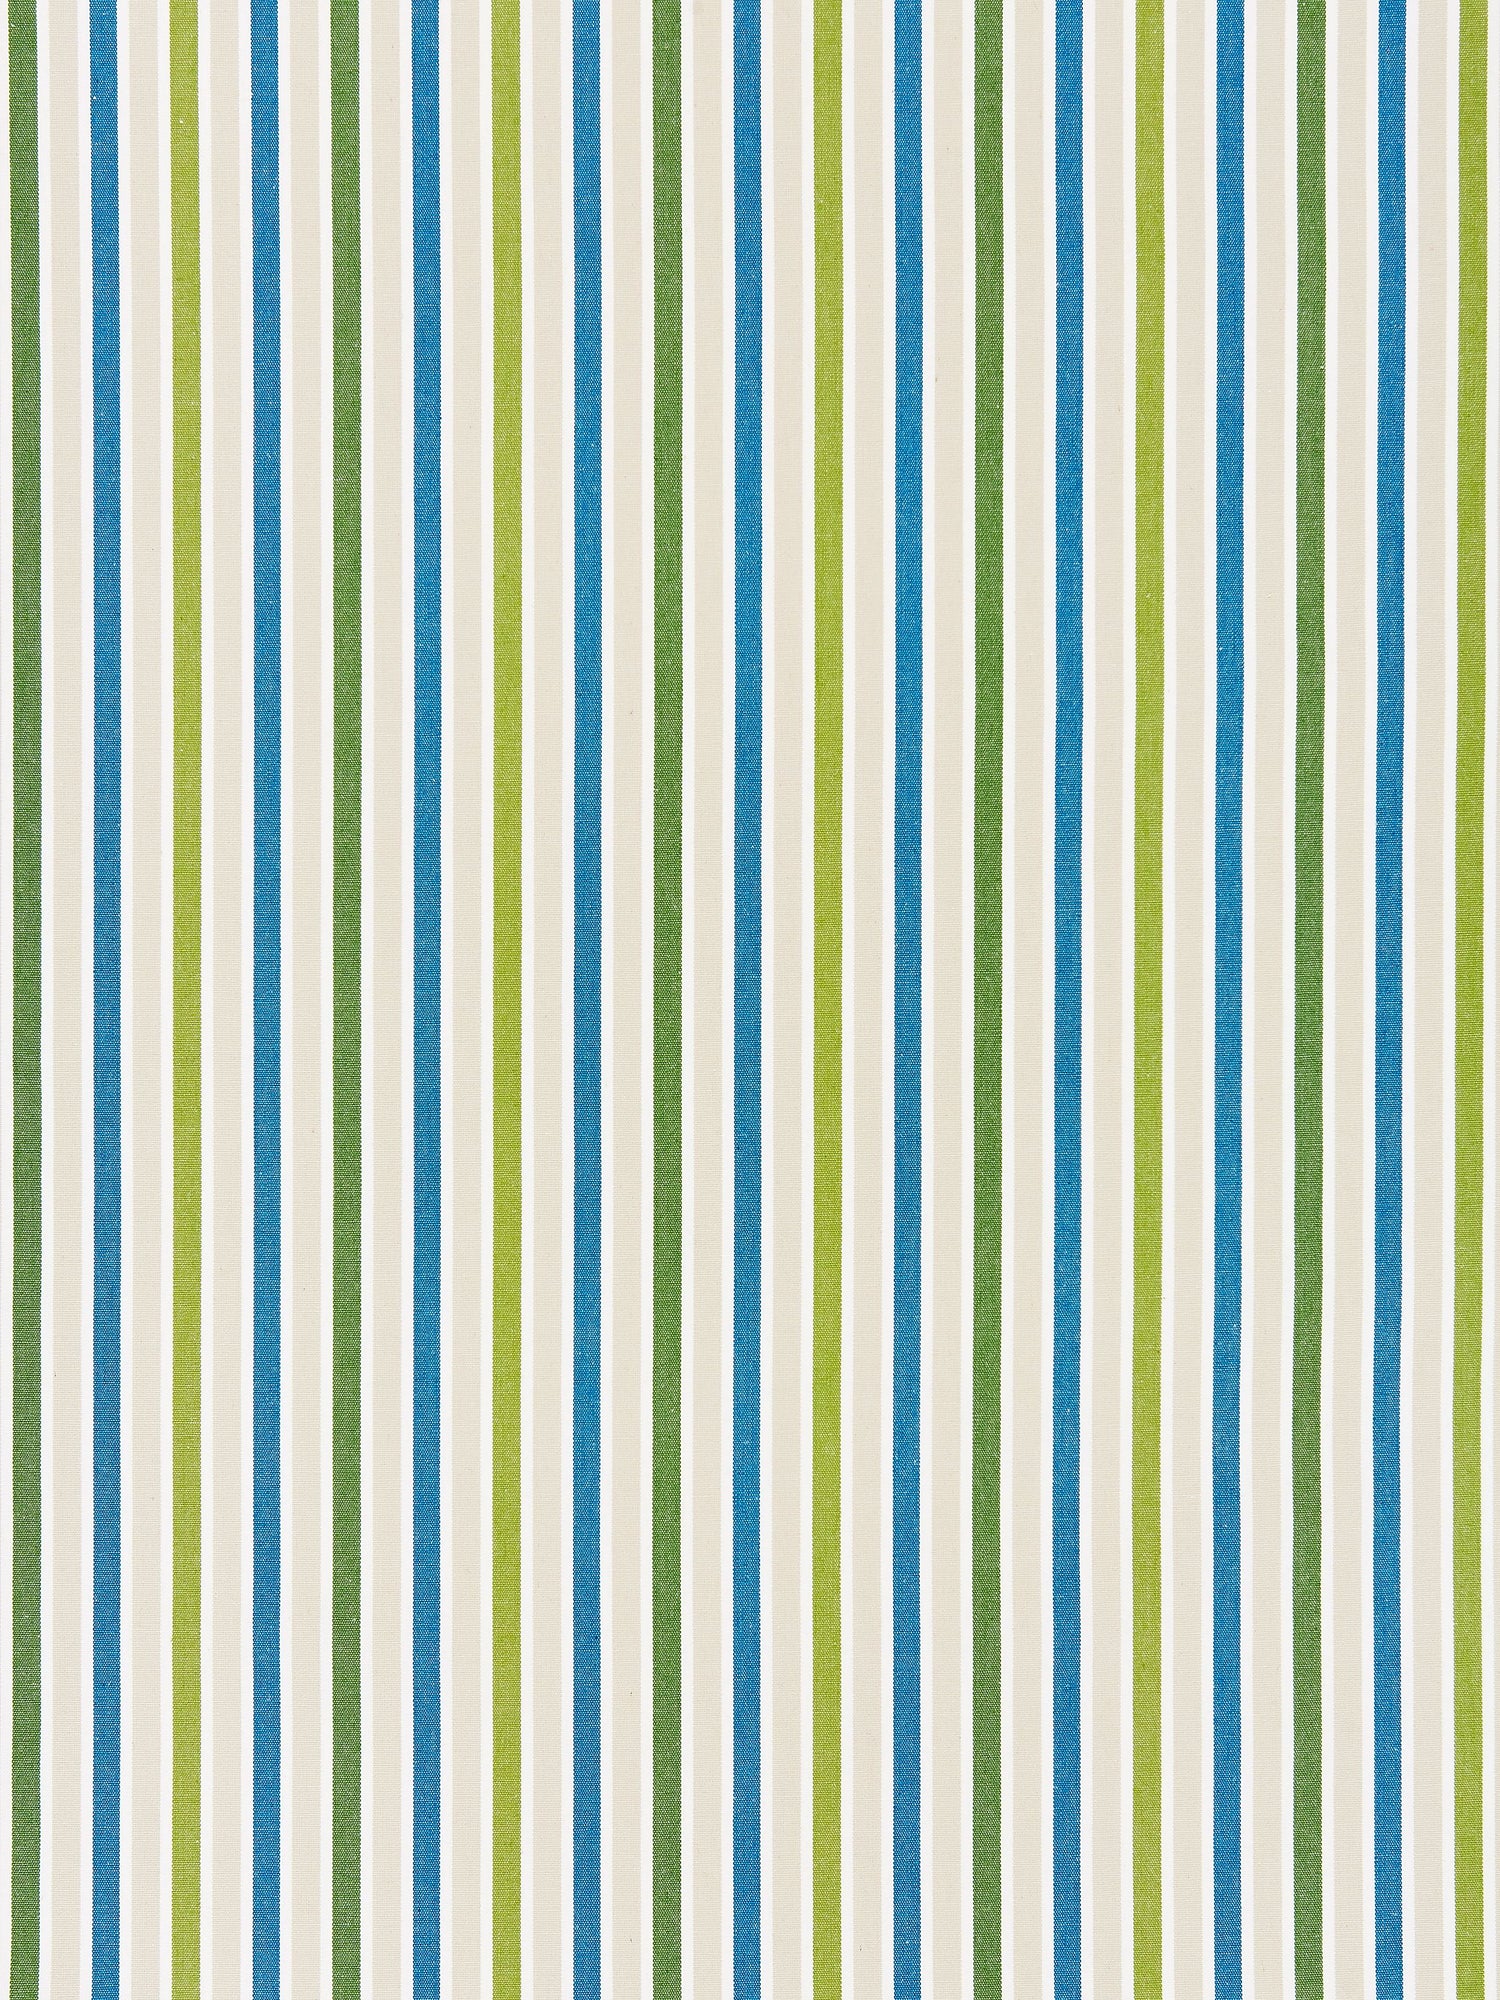 Leeds Cotton Stripe fabric in ocean palm color - pattern number SC 000327114 - by Scalamandre in the Scalamandre Fabrics Book 1 collection